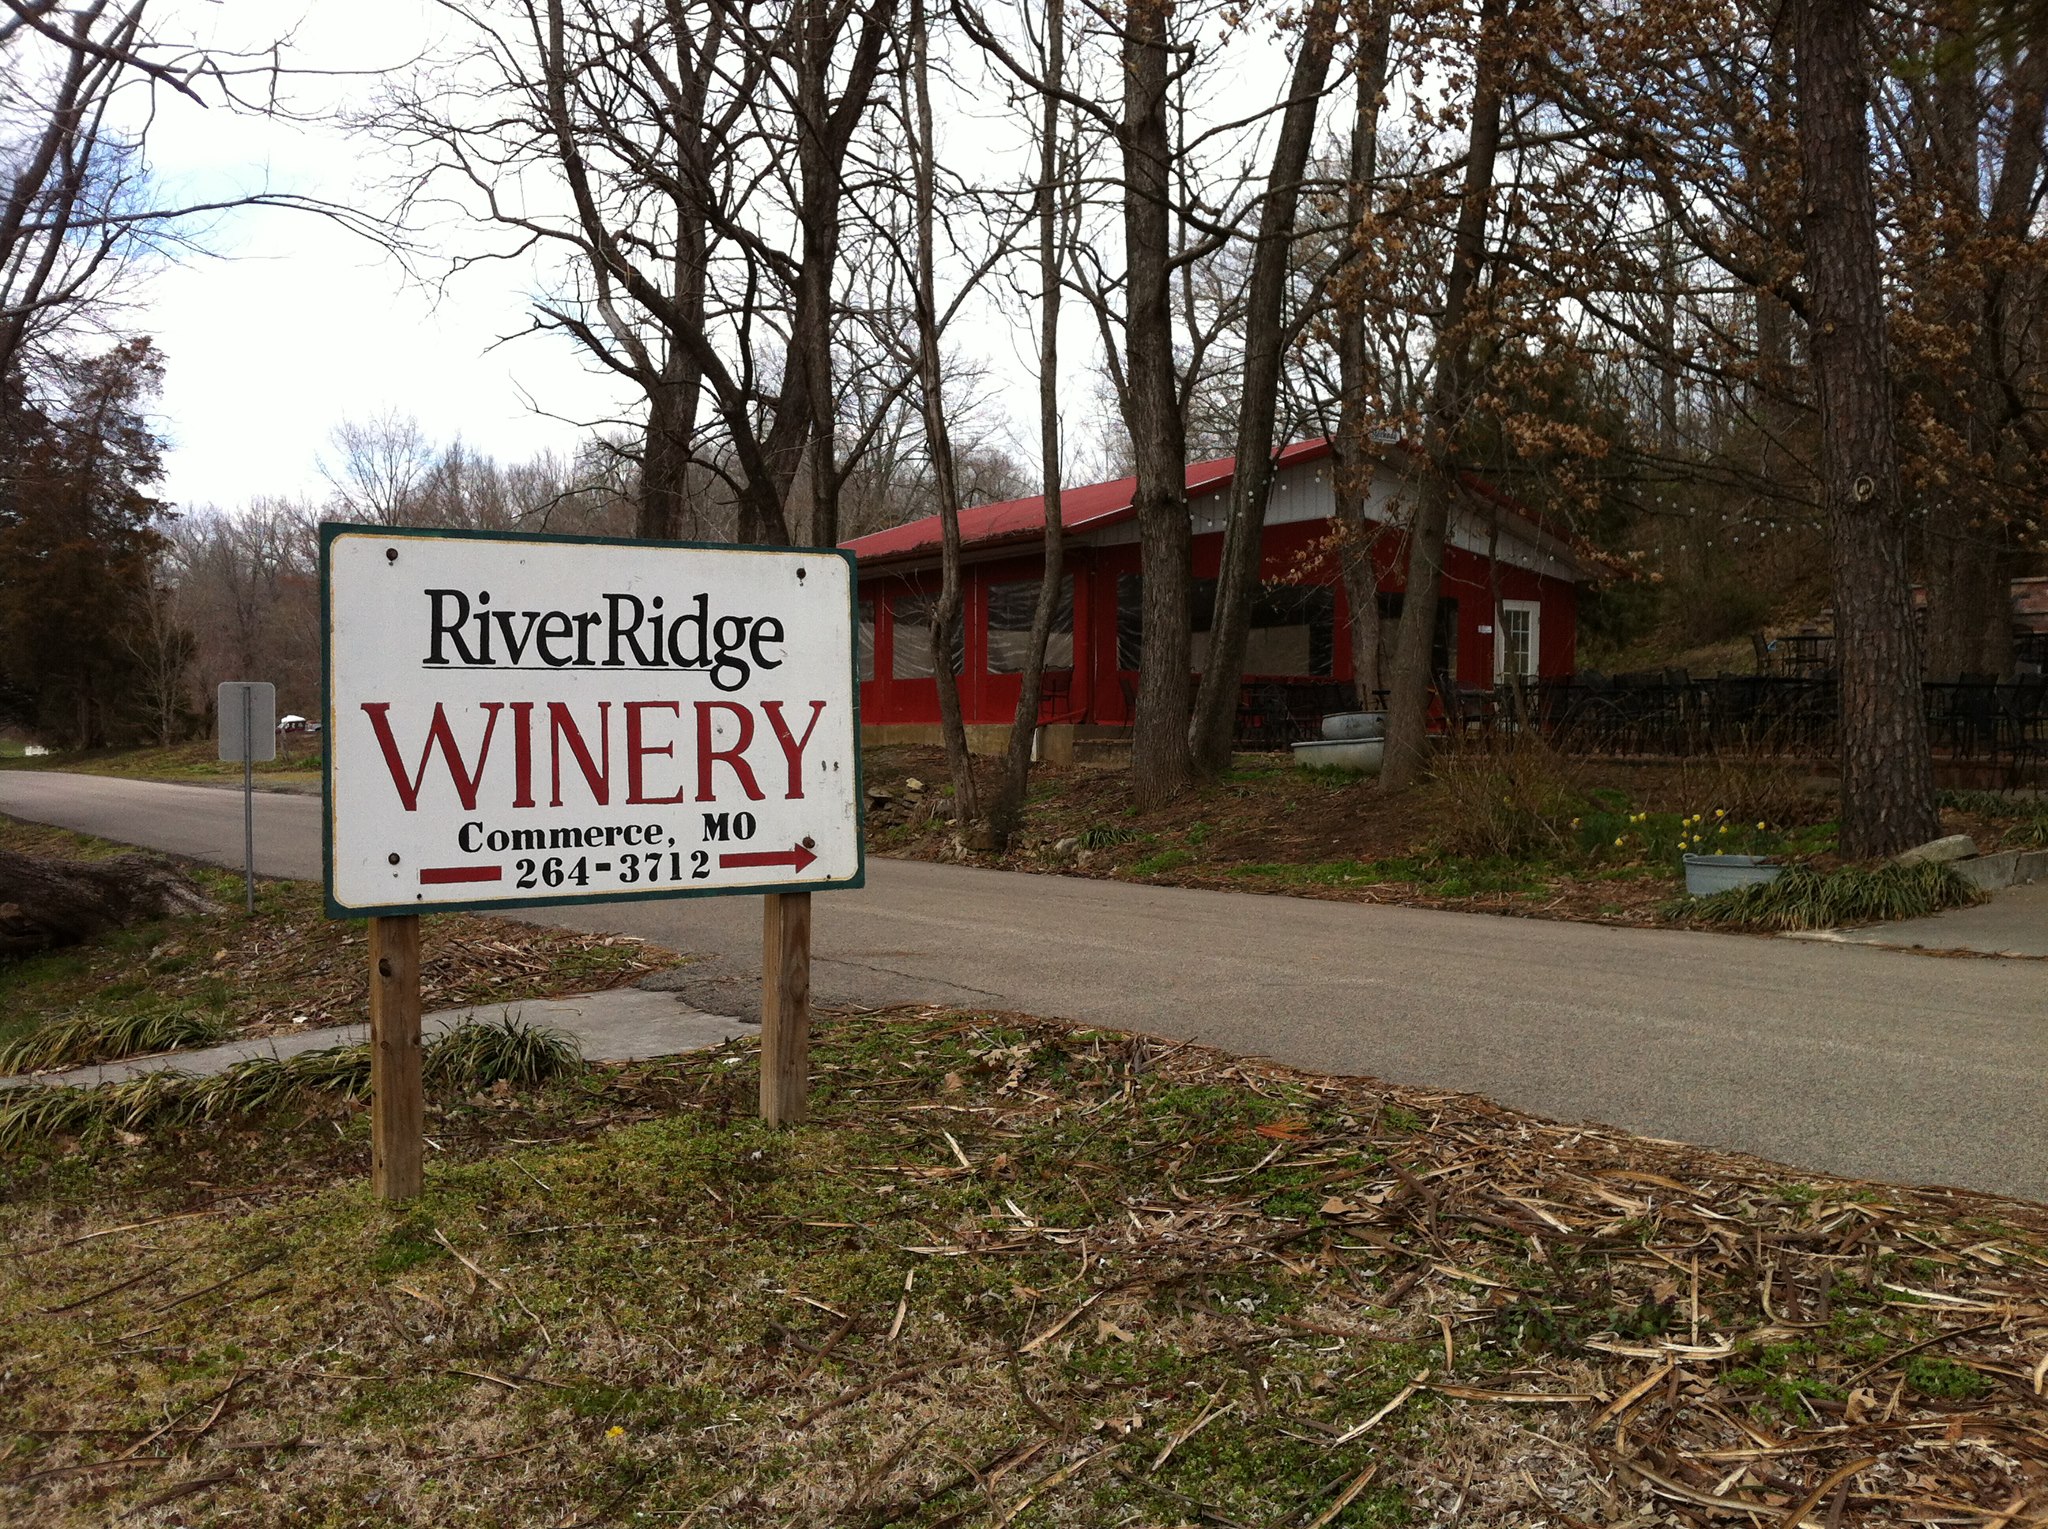 River Ridge Winery - Commerce- Winery sign that reads "River Ridge Winery- Commerce, MO. 264-3712"